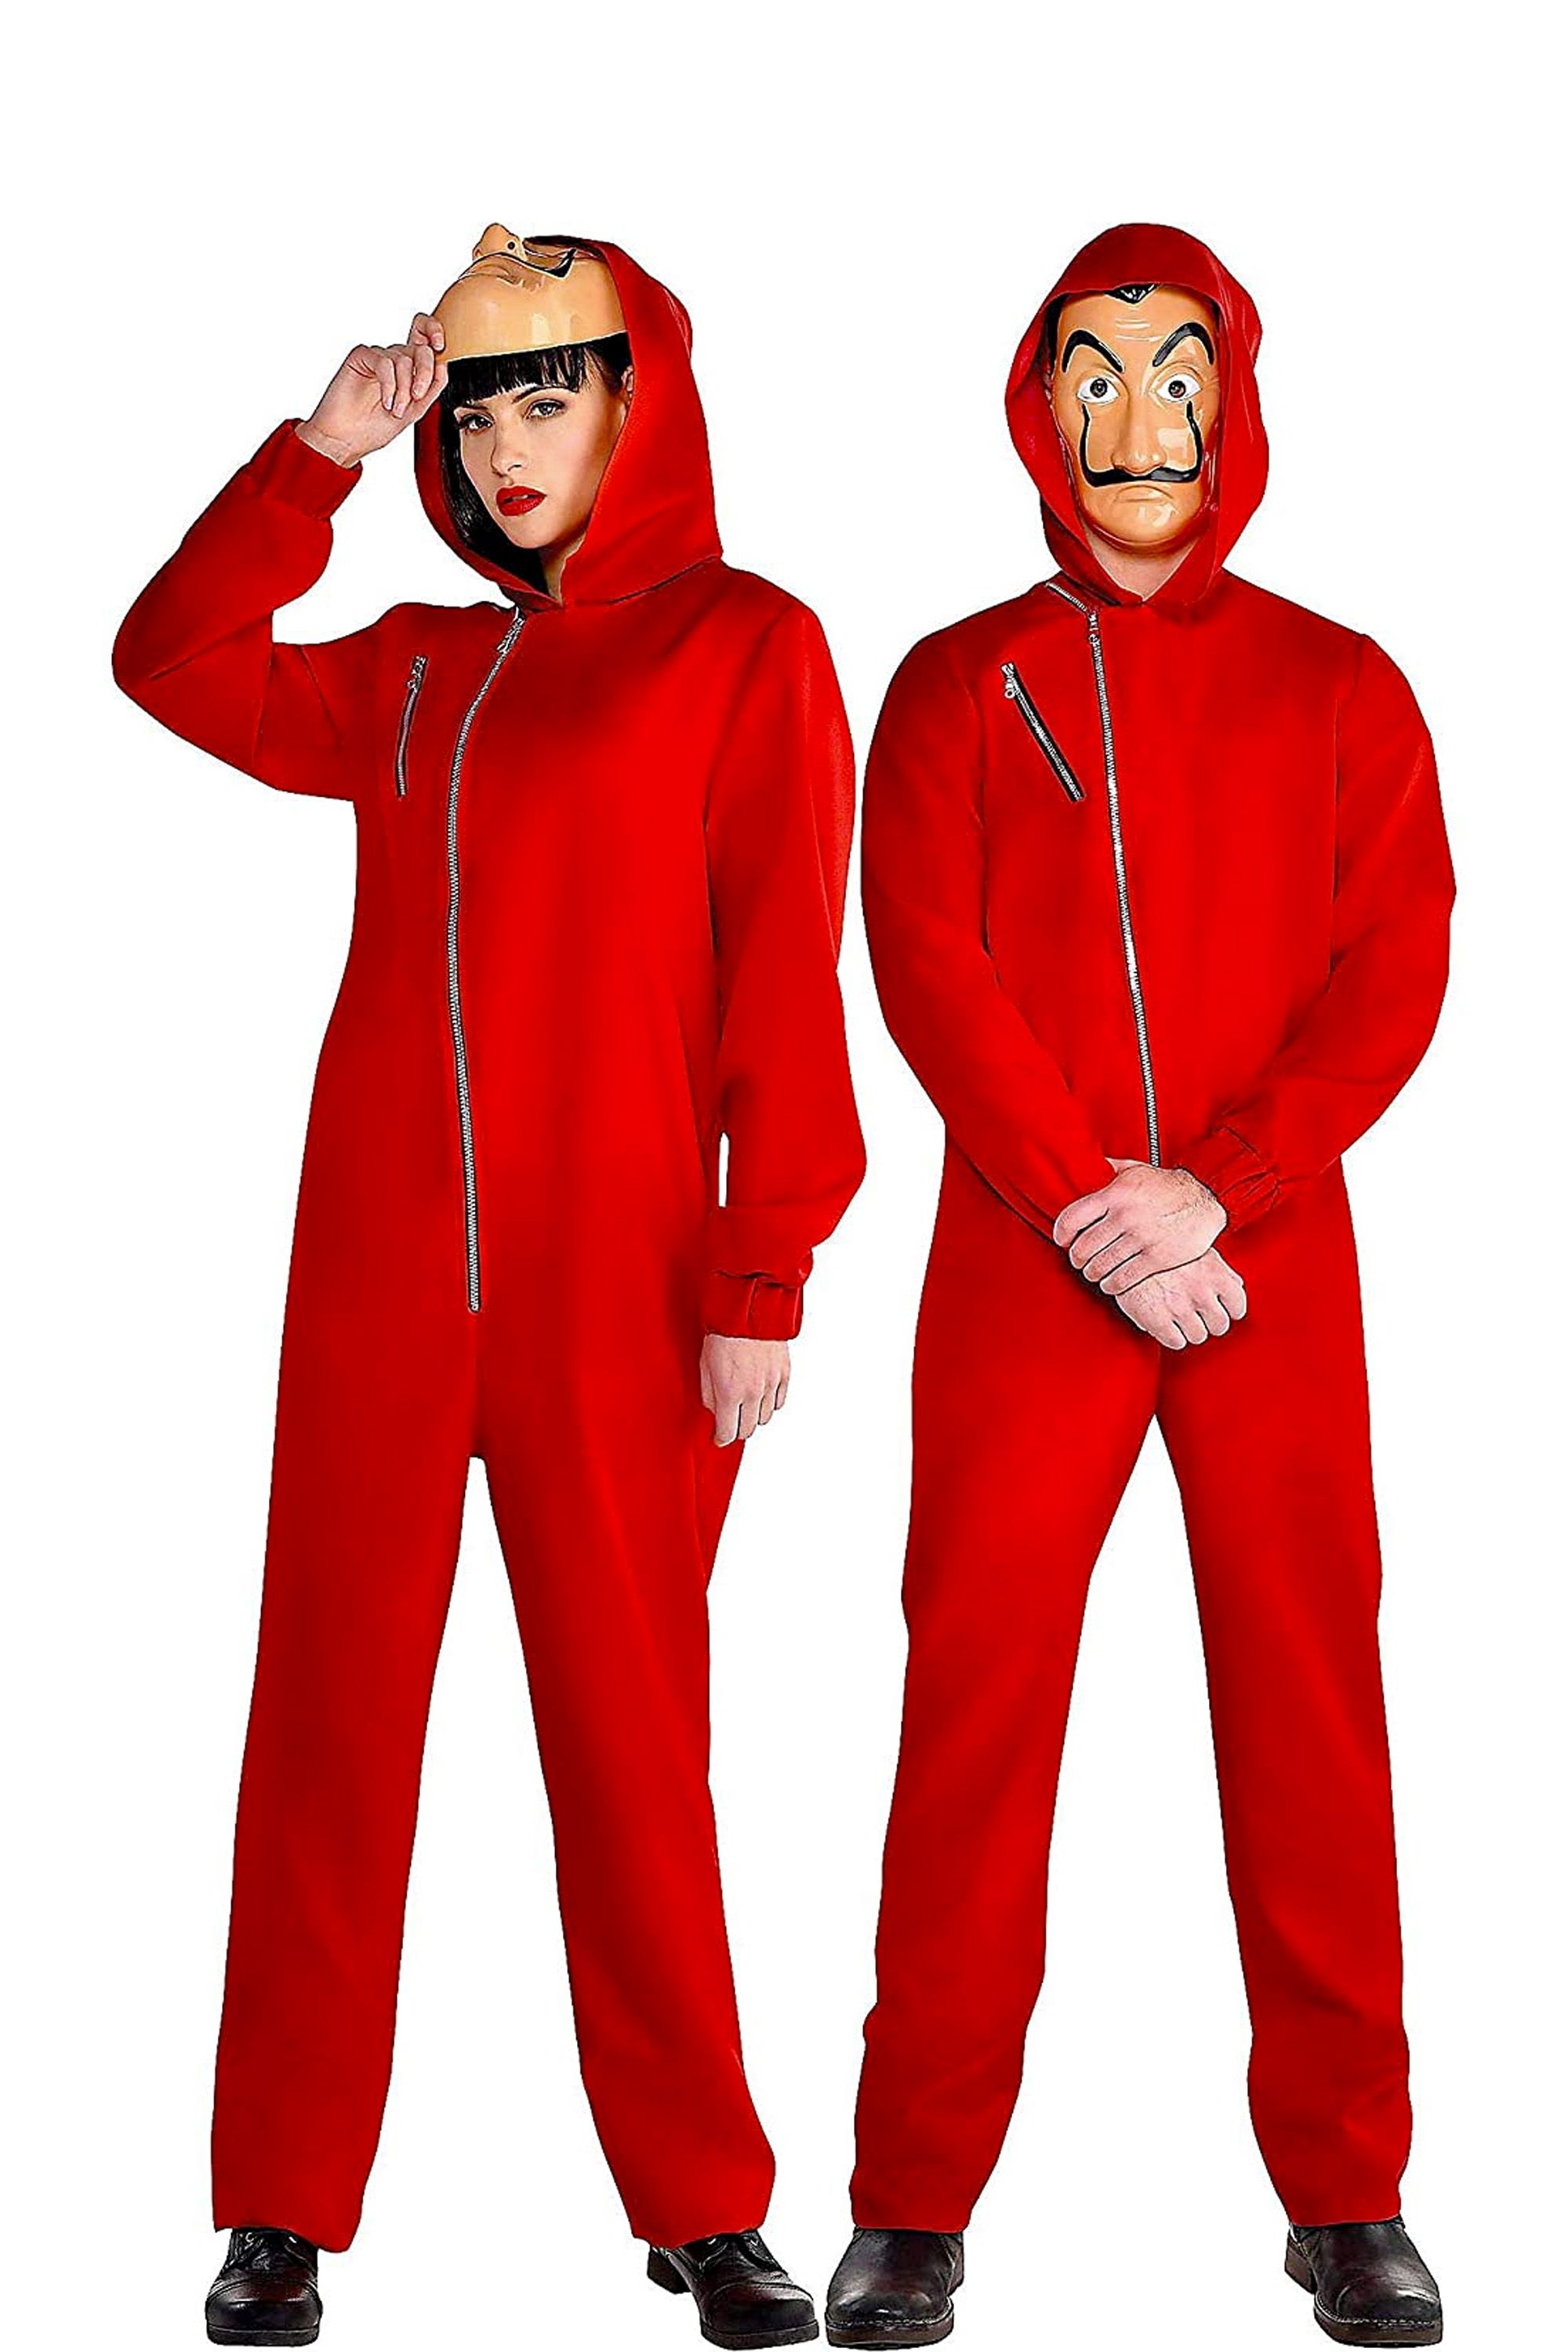 Best Scary Couples Costumes for Halloween 2021 - Costumes for Couples